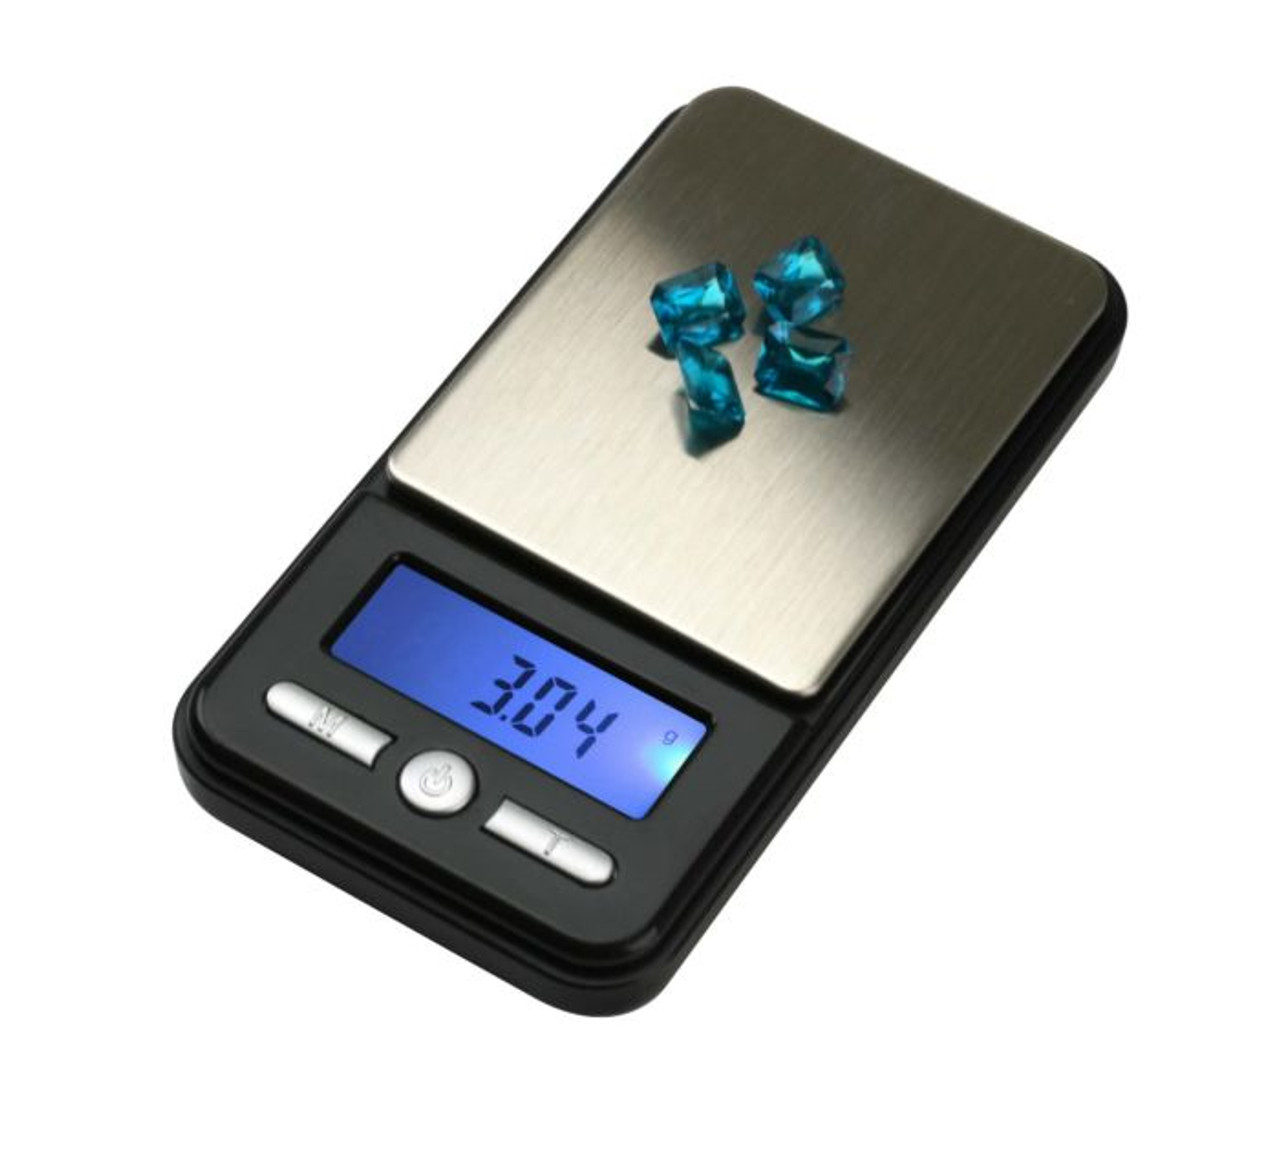 American Weigh Scales AC Pro Series Digital Pocket Weight Scale